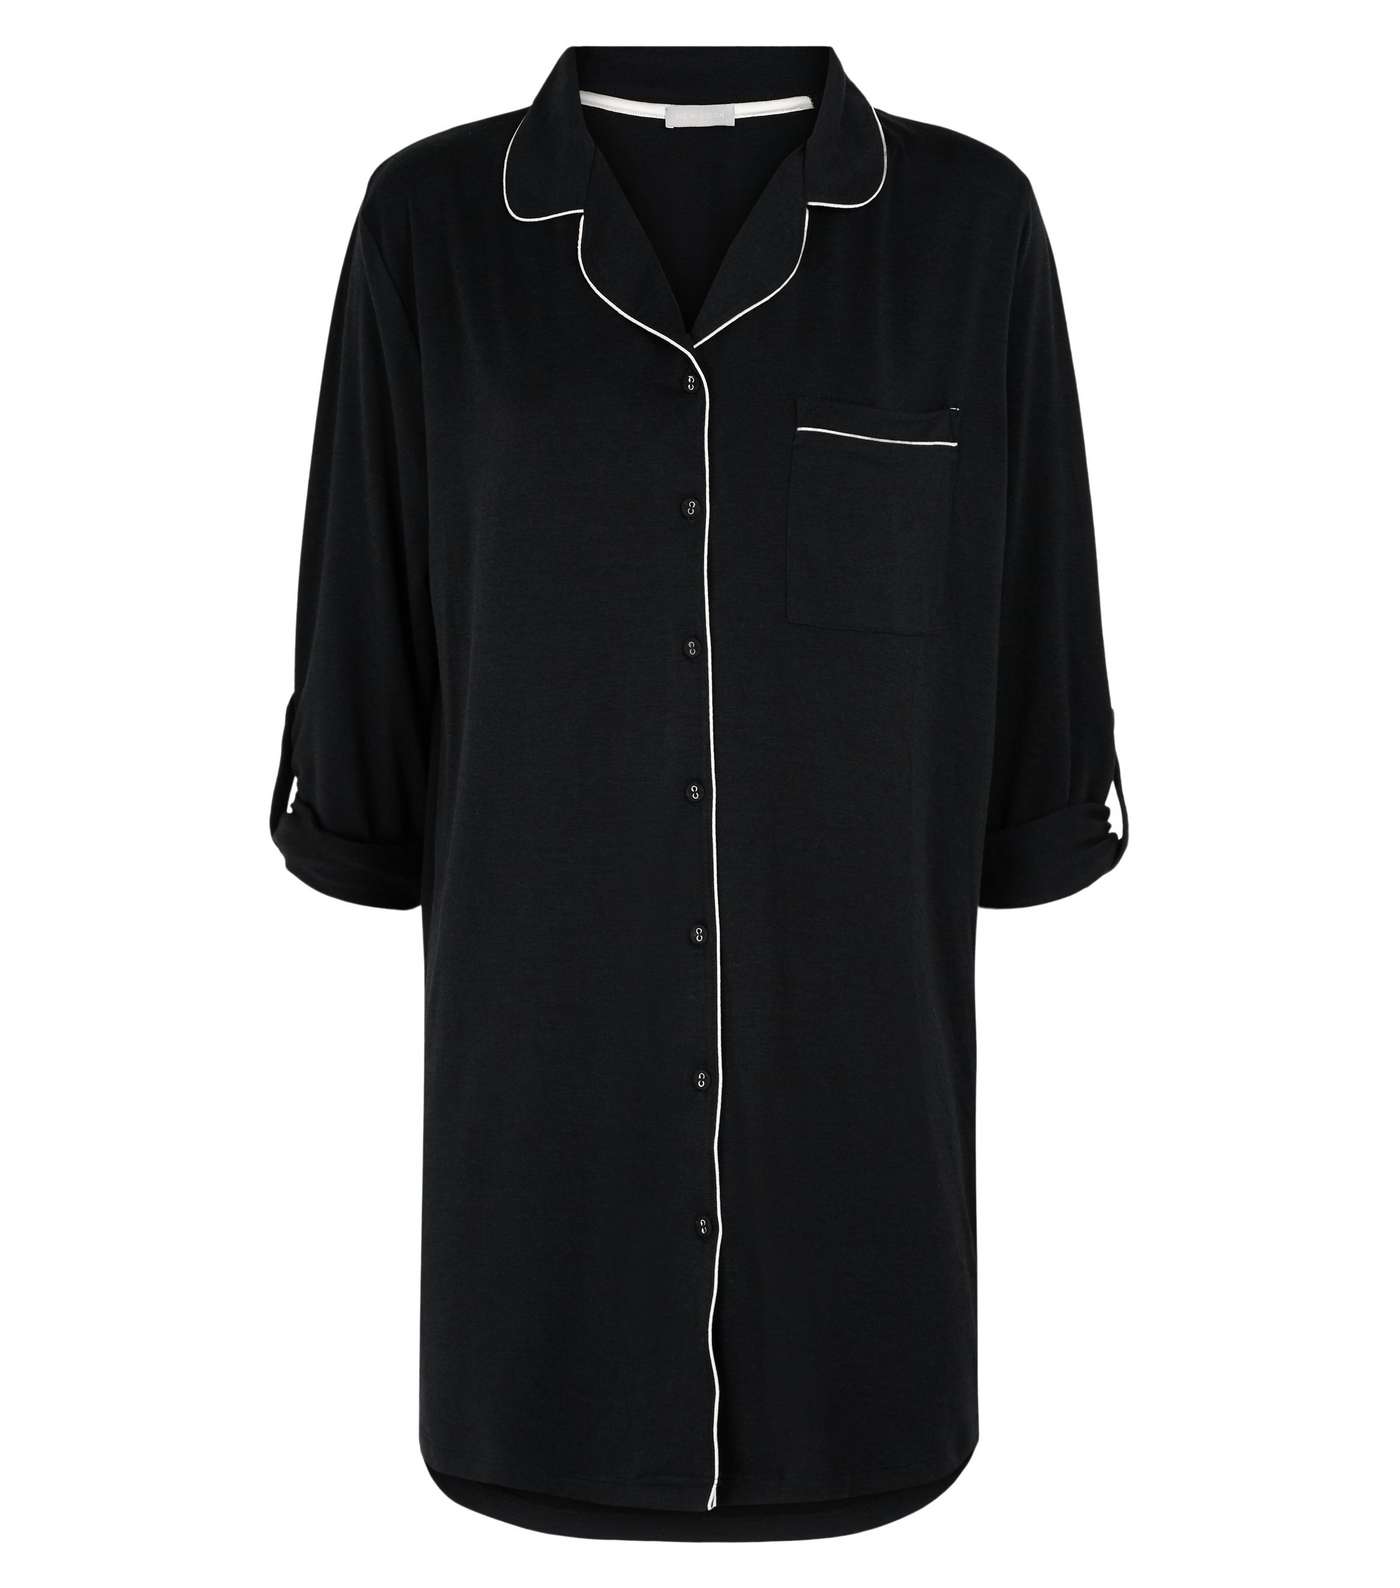 Black Jersey Revere Collar Piped Nightshirt Image 4